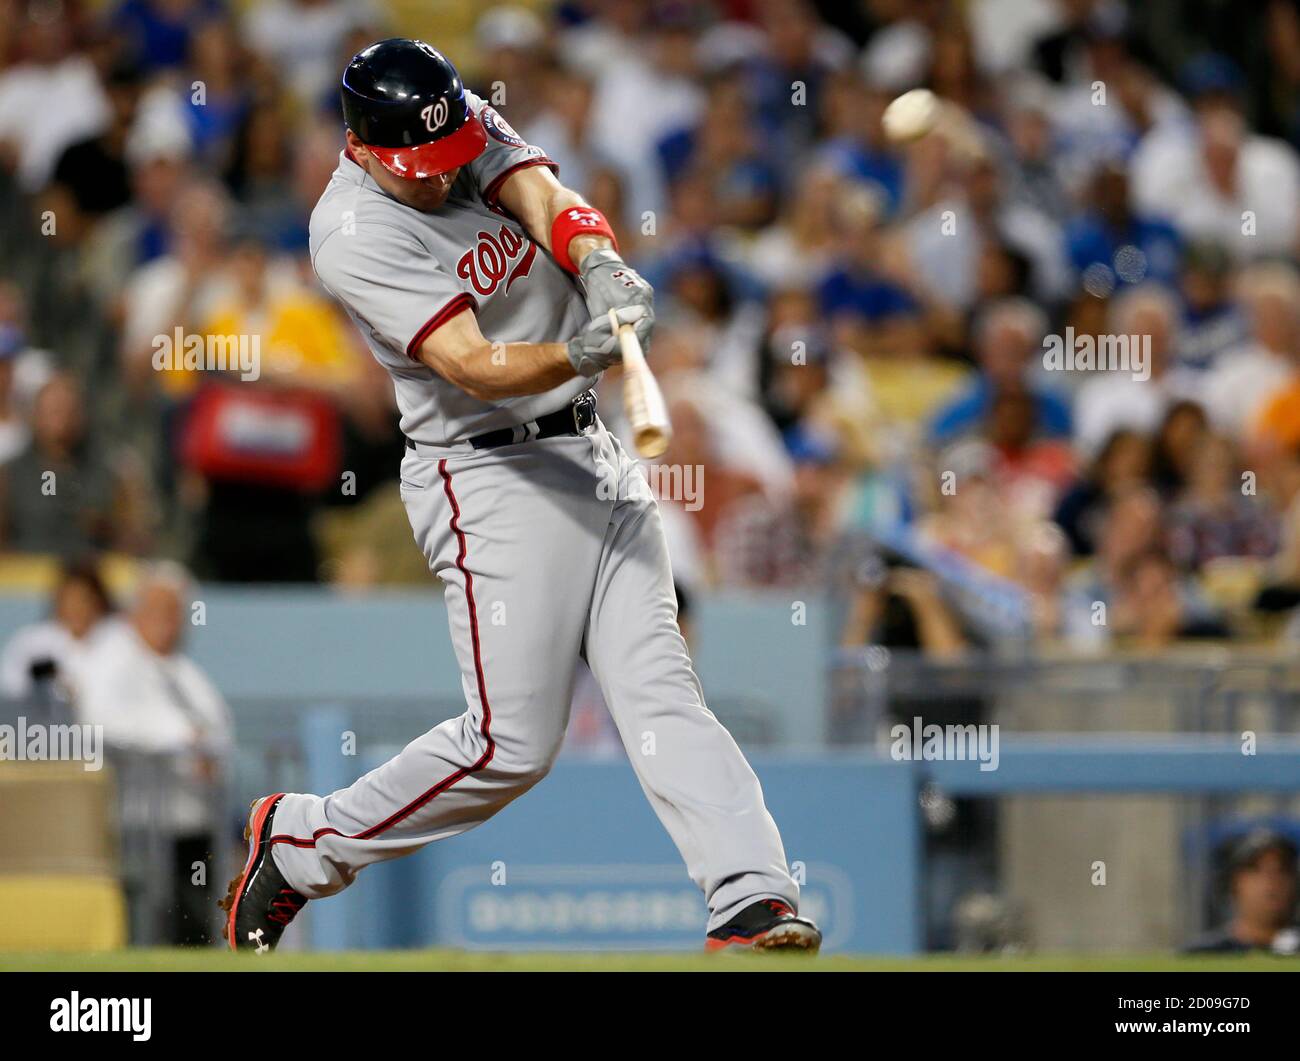 Washington Nationals' Ryan Zimmerman hits a 2RBI double to score Stephen Lombardozzi and Jordan Zimmermann against the Los Angeles Dodgers during the third inning of their MLB National League baseball game in Los Angeles, California May 13, 2013. REUTERS/Lucy Nicholson (UNITED STATES - Tags: SPORT BASEBALL) Stock Photo